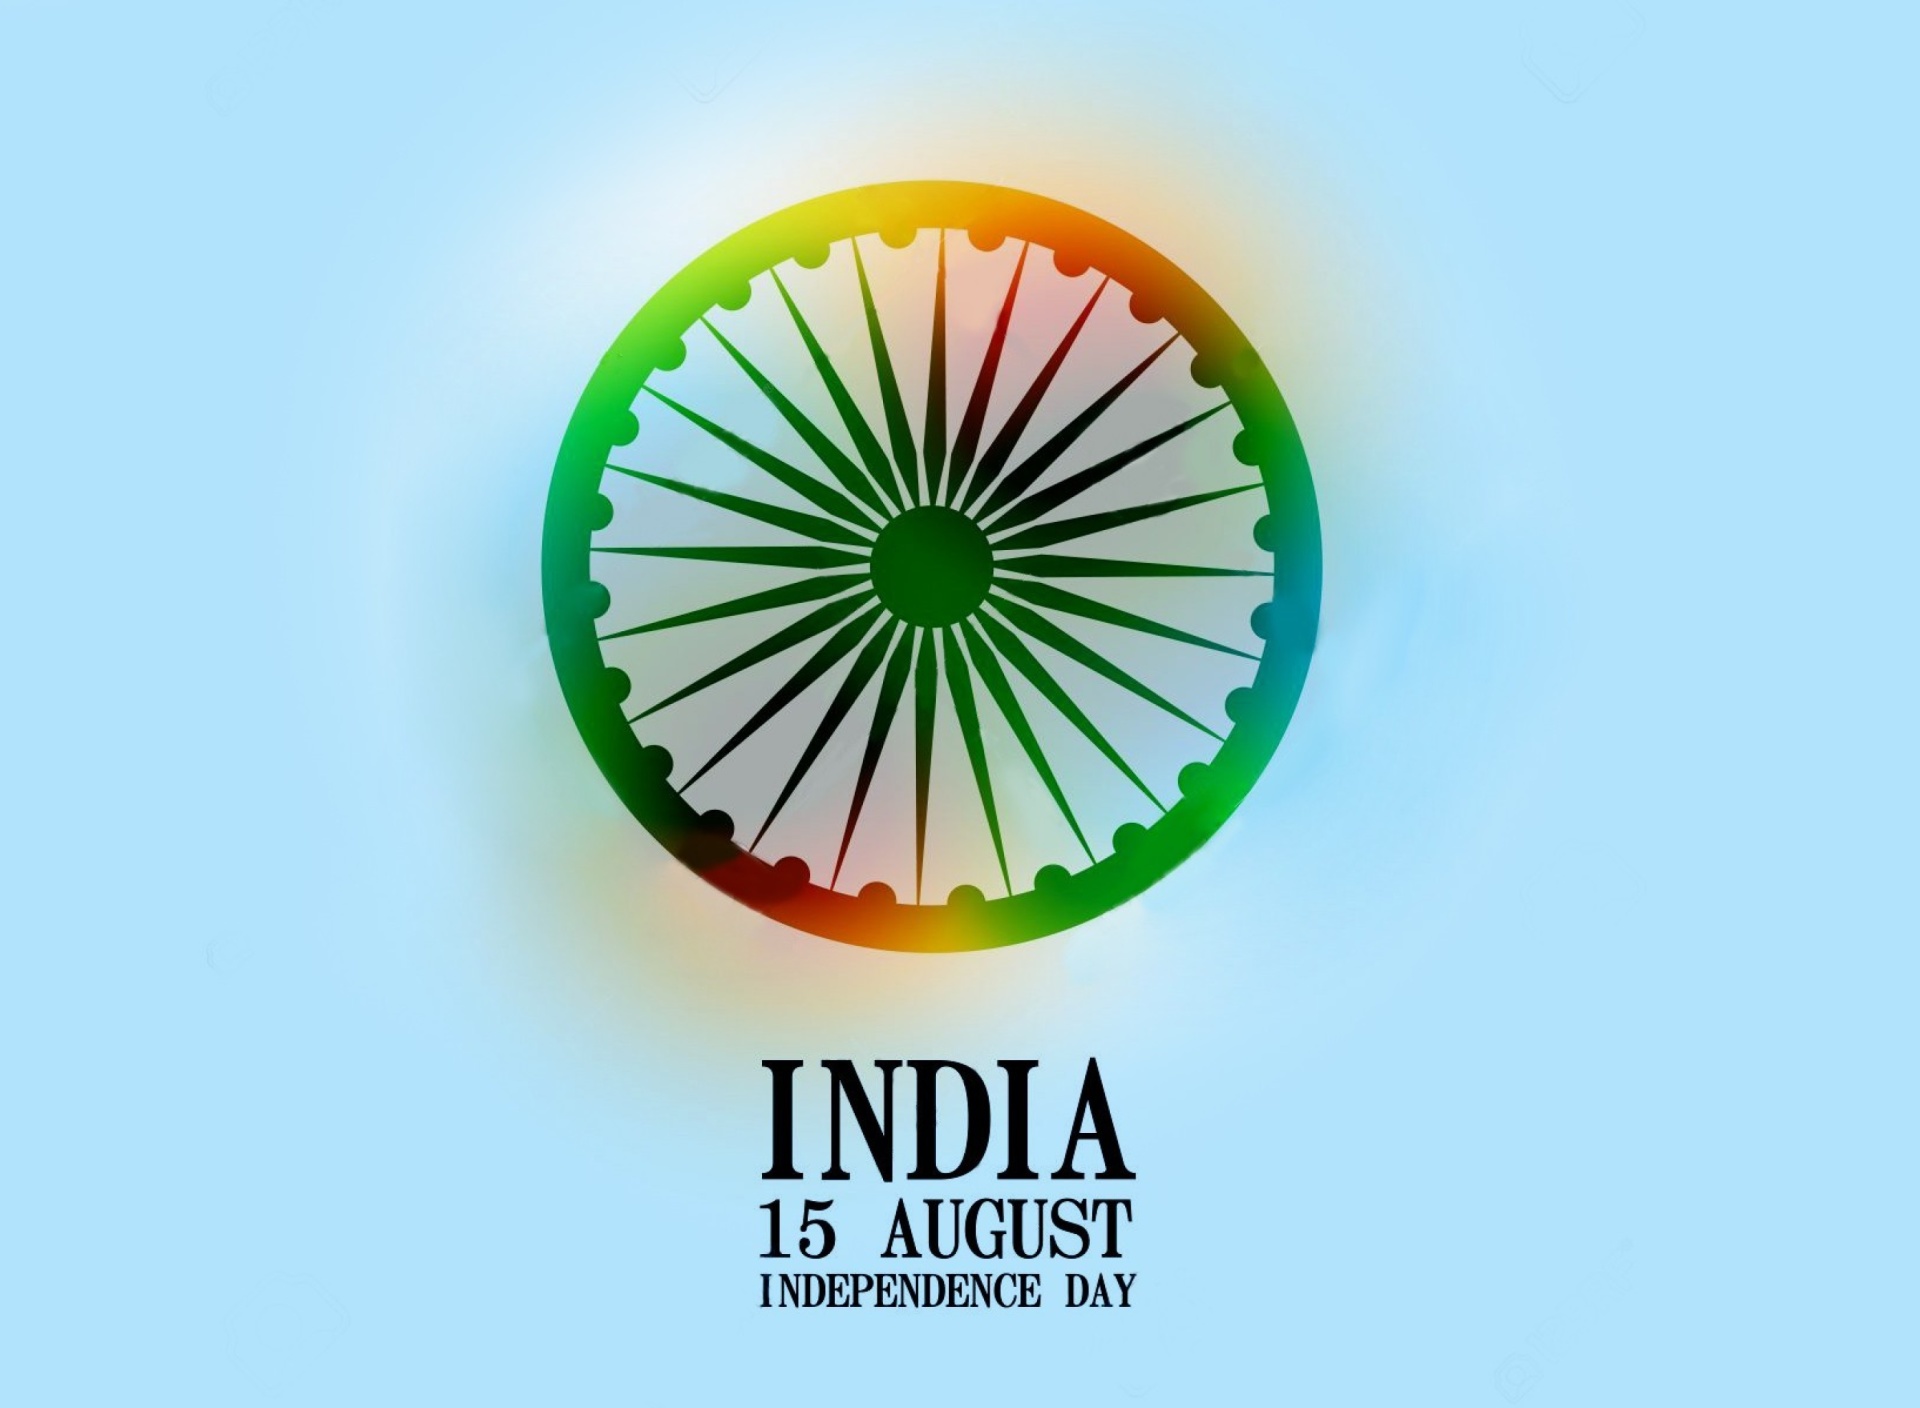 India Independence Day 15 August wallpaper 1920x1408